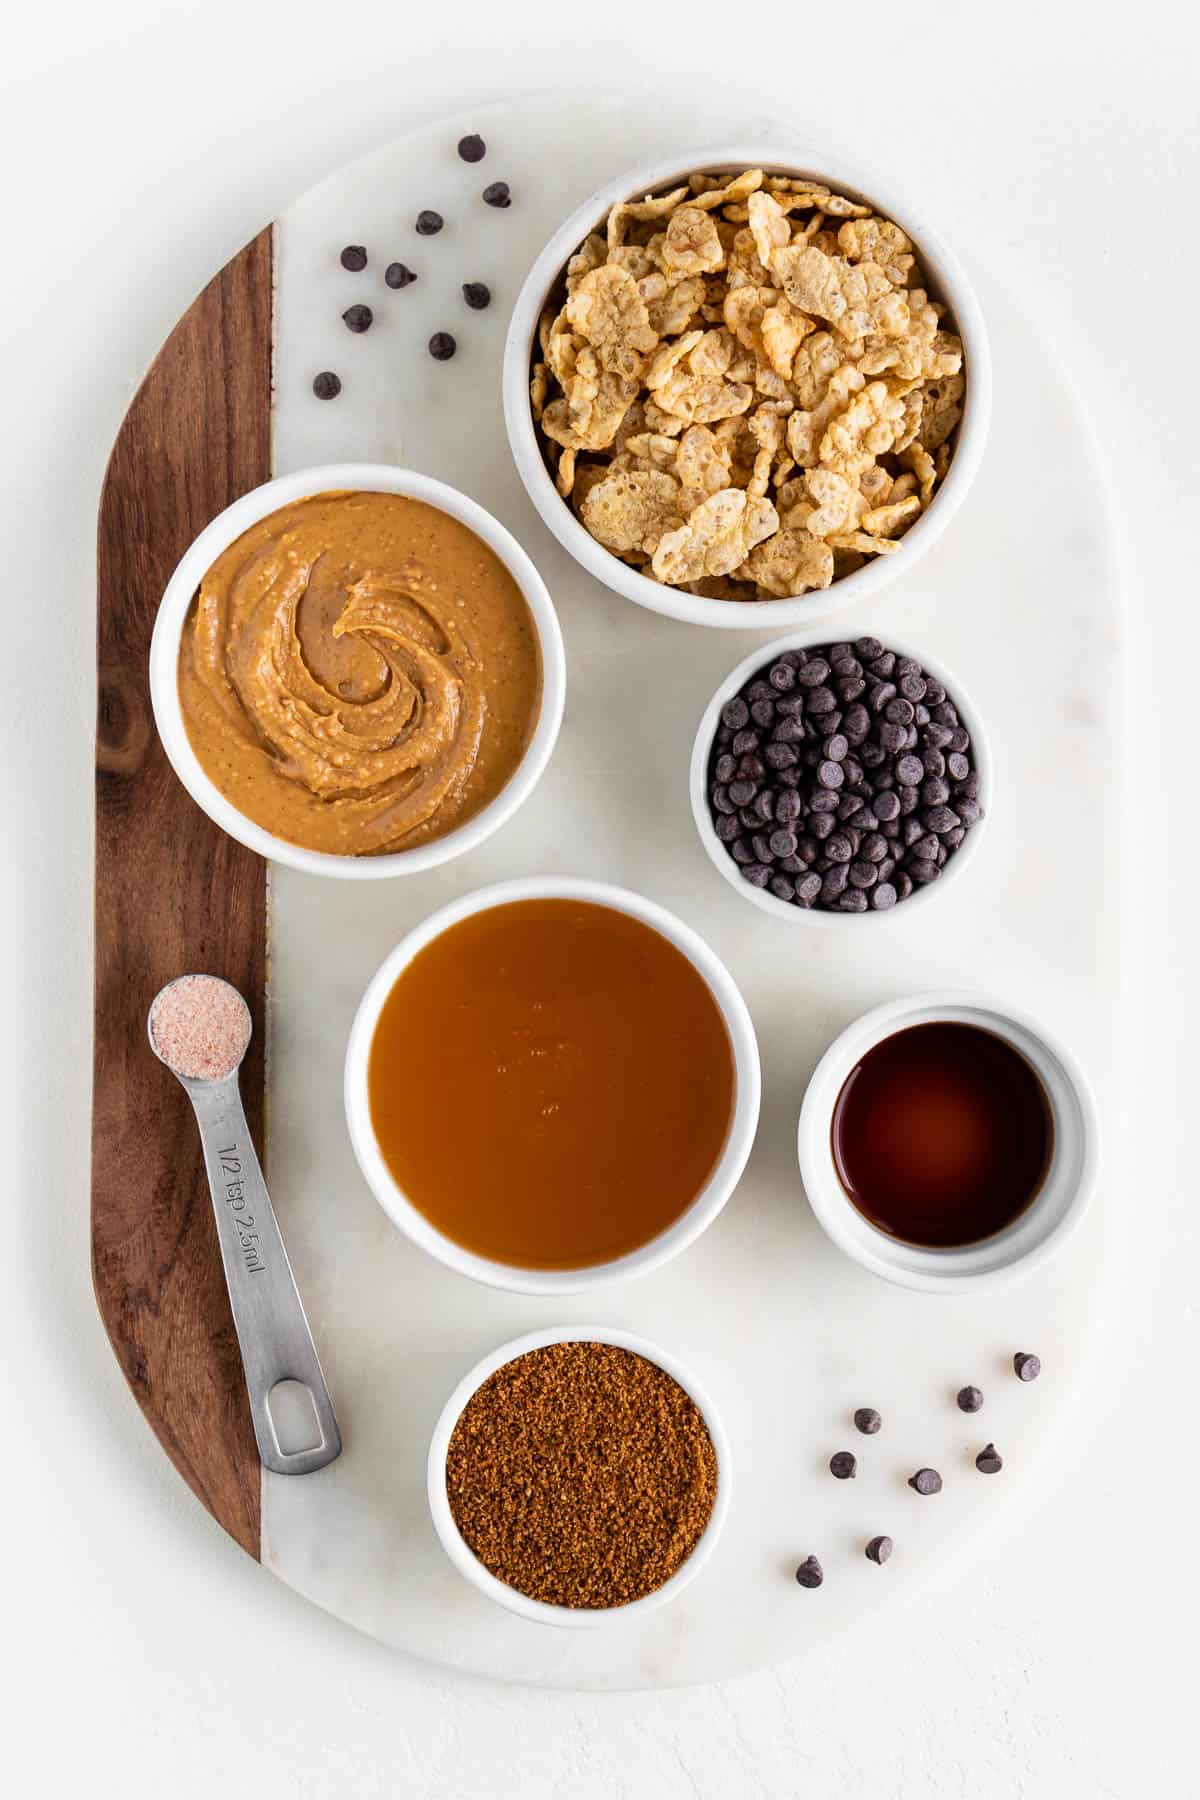 a wood and marble board topped with small bowls of ingredients, including special k cereal, peanut butter, brown rice syrup, chocolate chips, coconut sugar, and vanilla extract